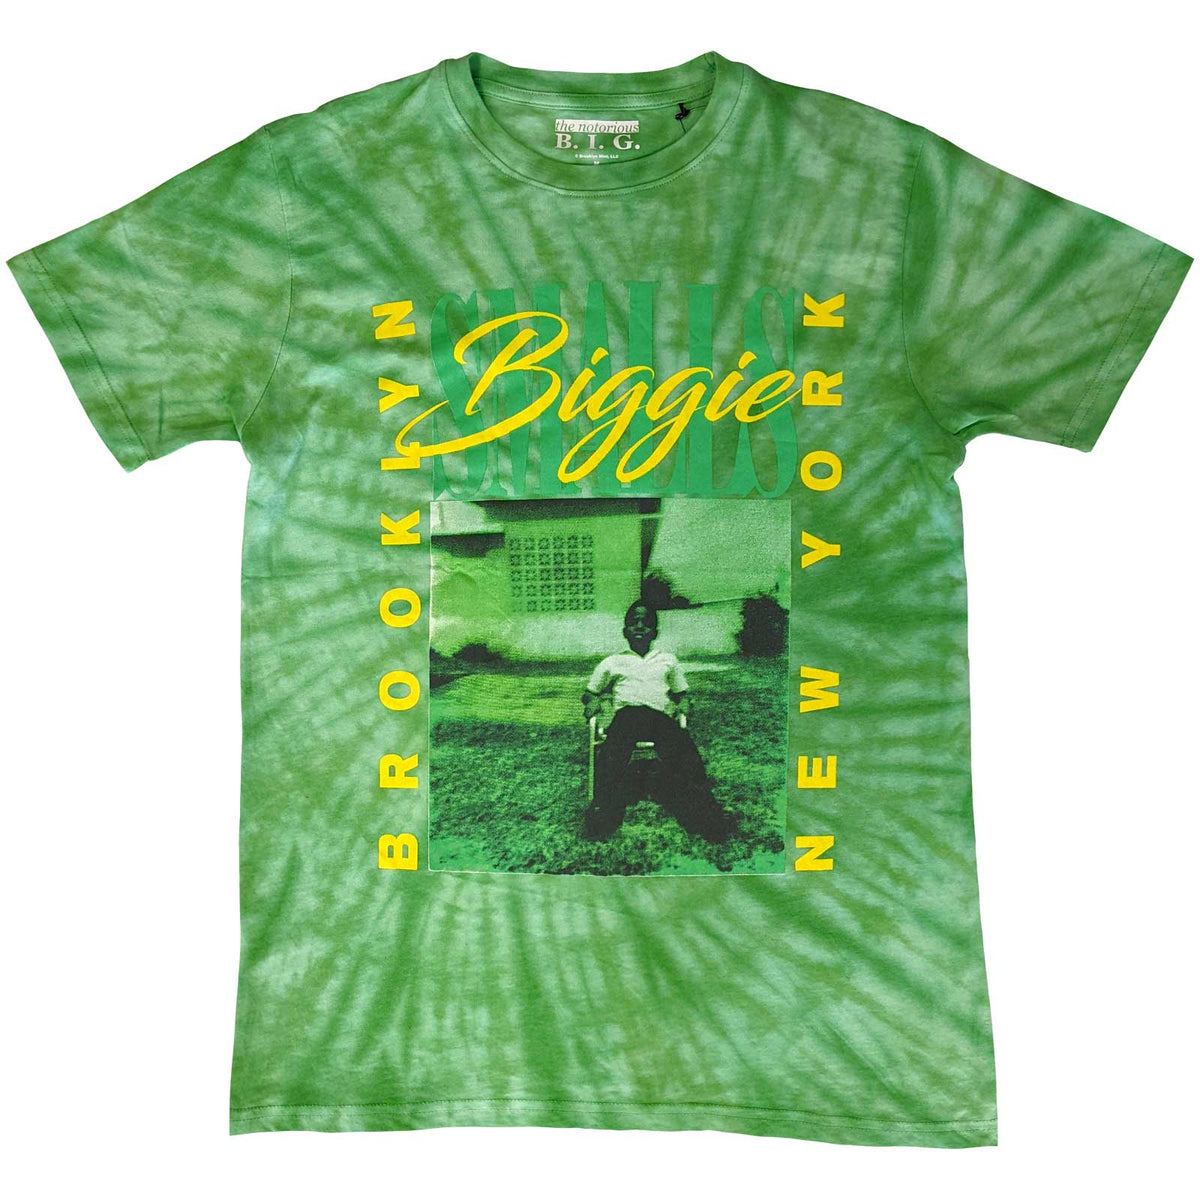 Biggie Smalls Adult T-Shirt - 90's New York City (Wash Collection) - Official Licensed Design